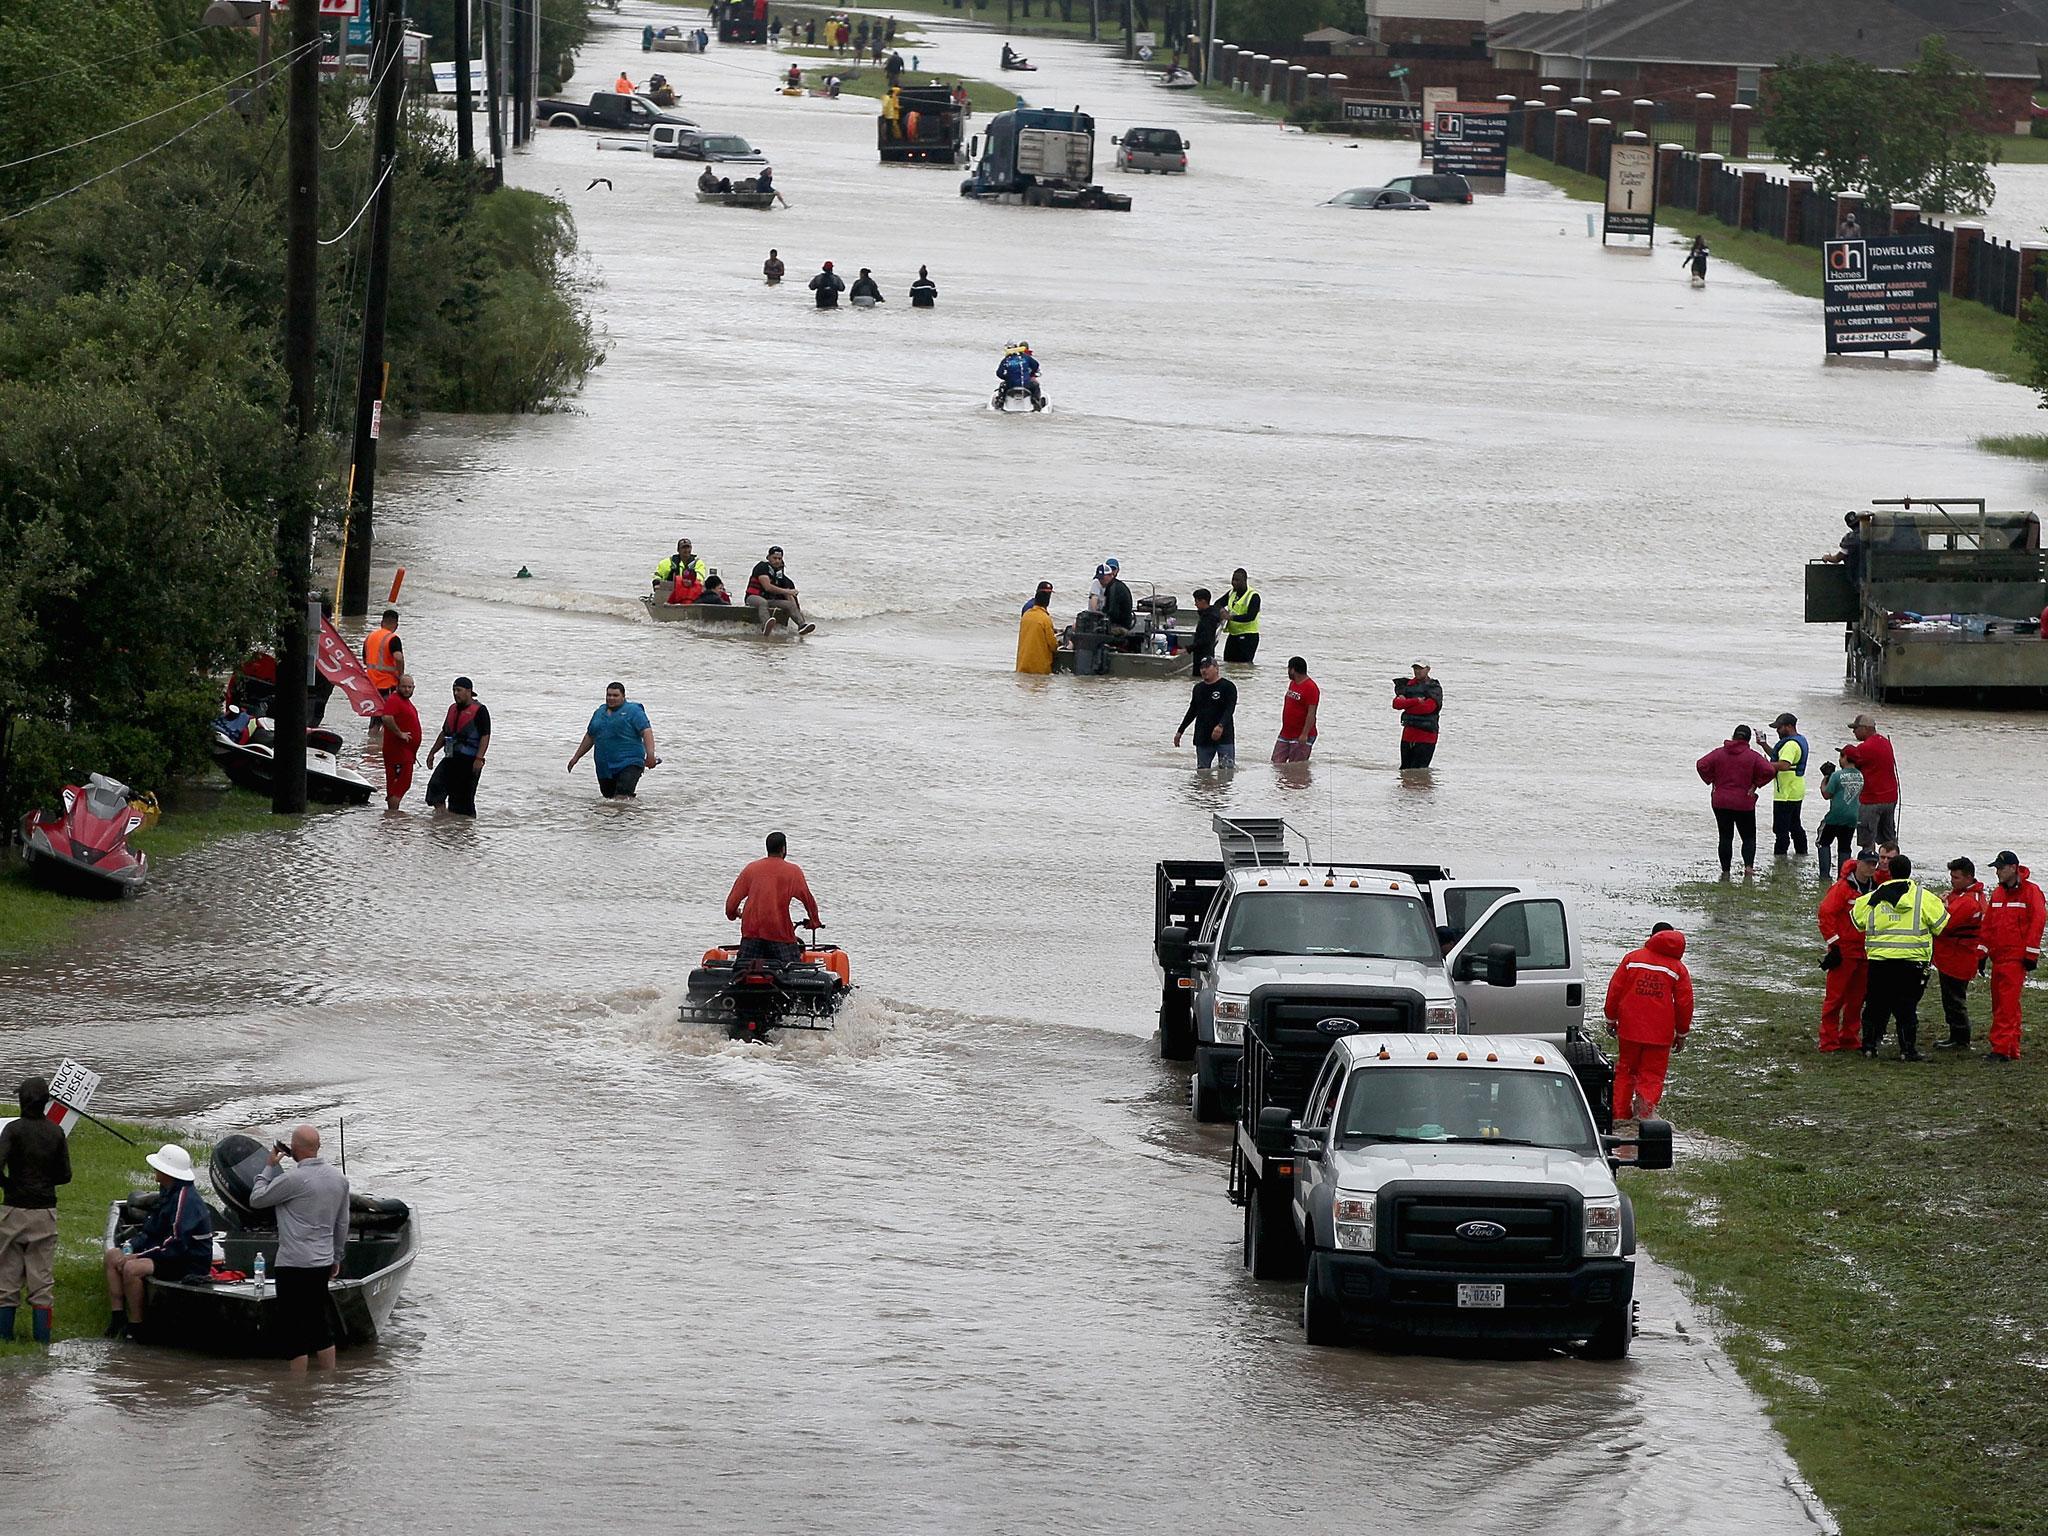 People make their way out of a flooded neighborhood after it was inundated with rain water following Hurricane Harvey